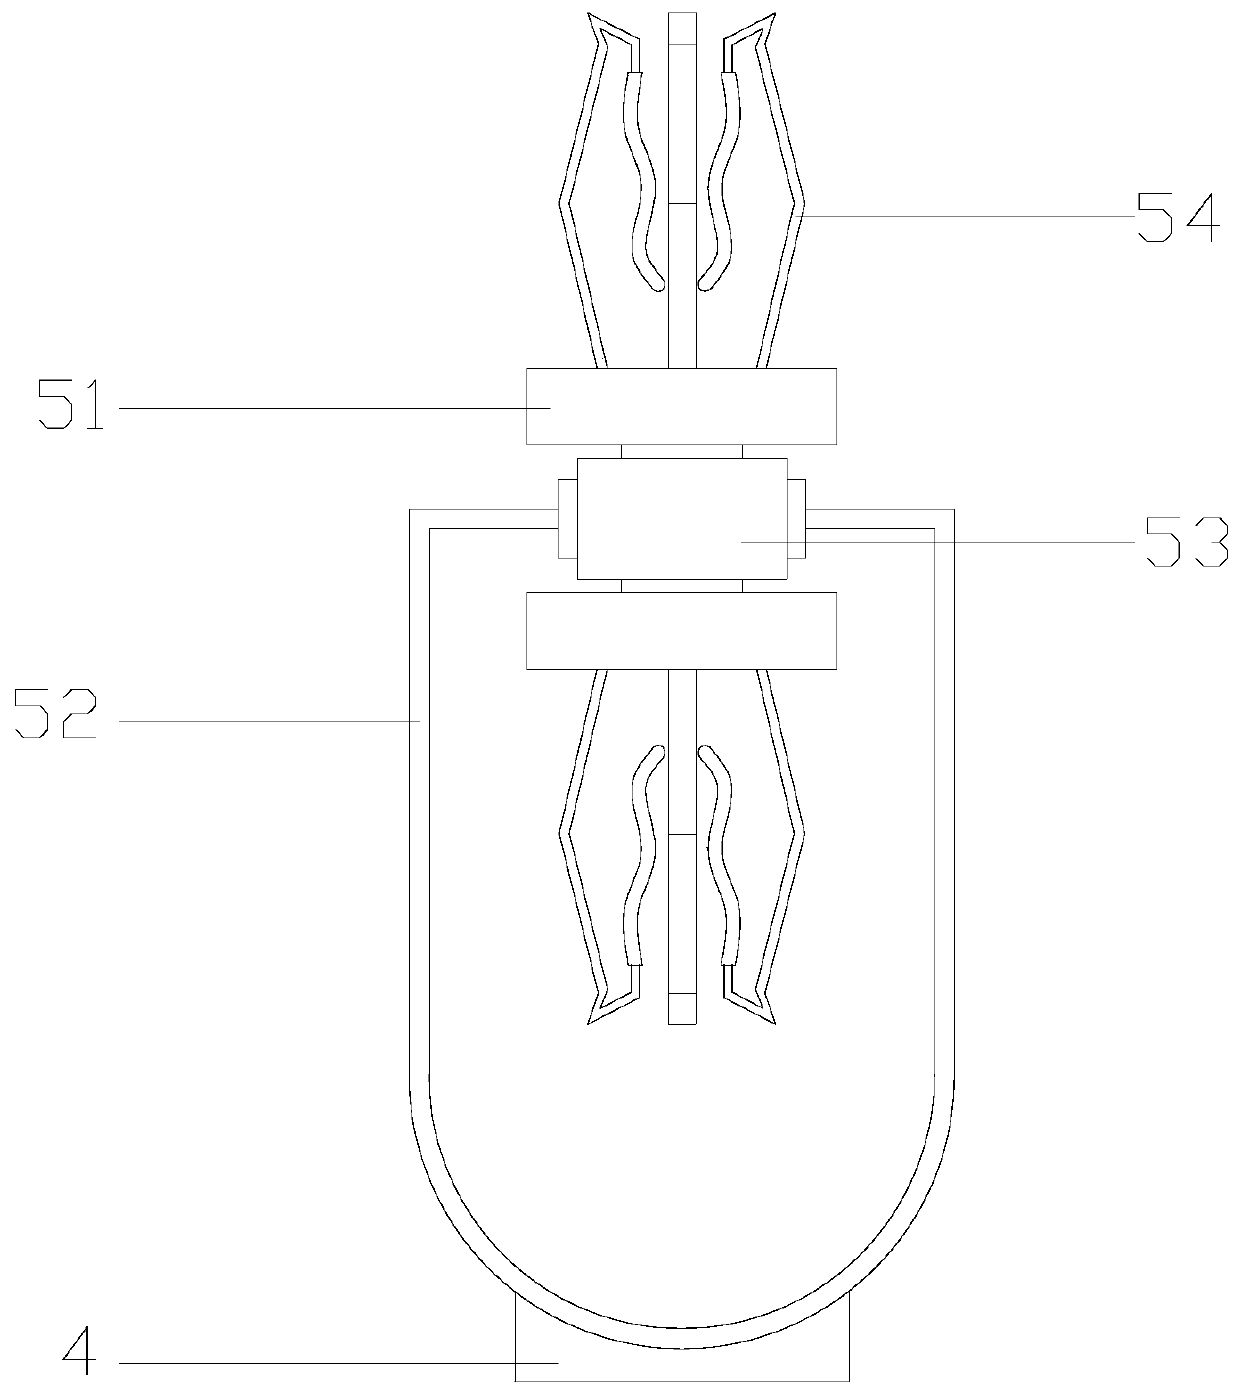 LED lamp installation device based on gravity stabilization